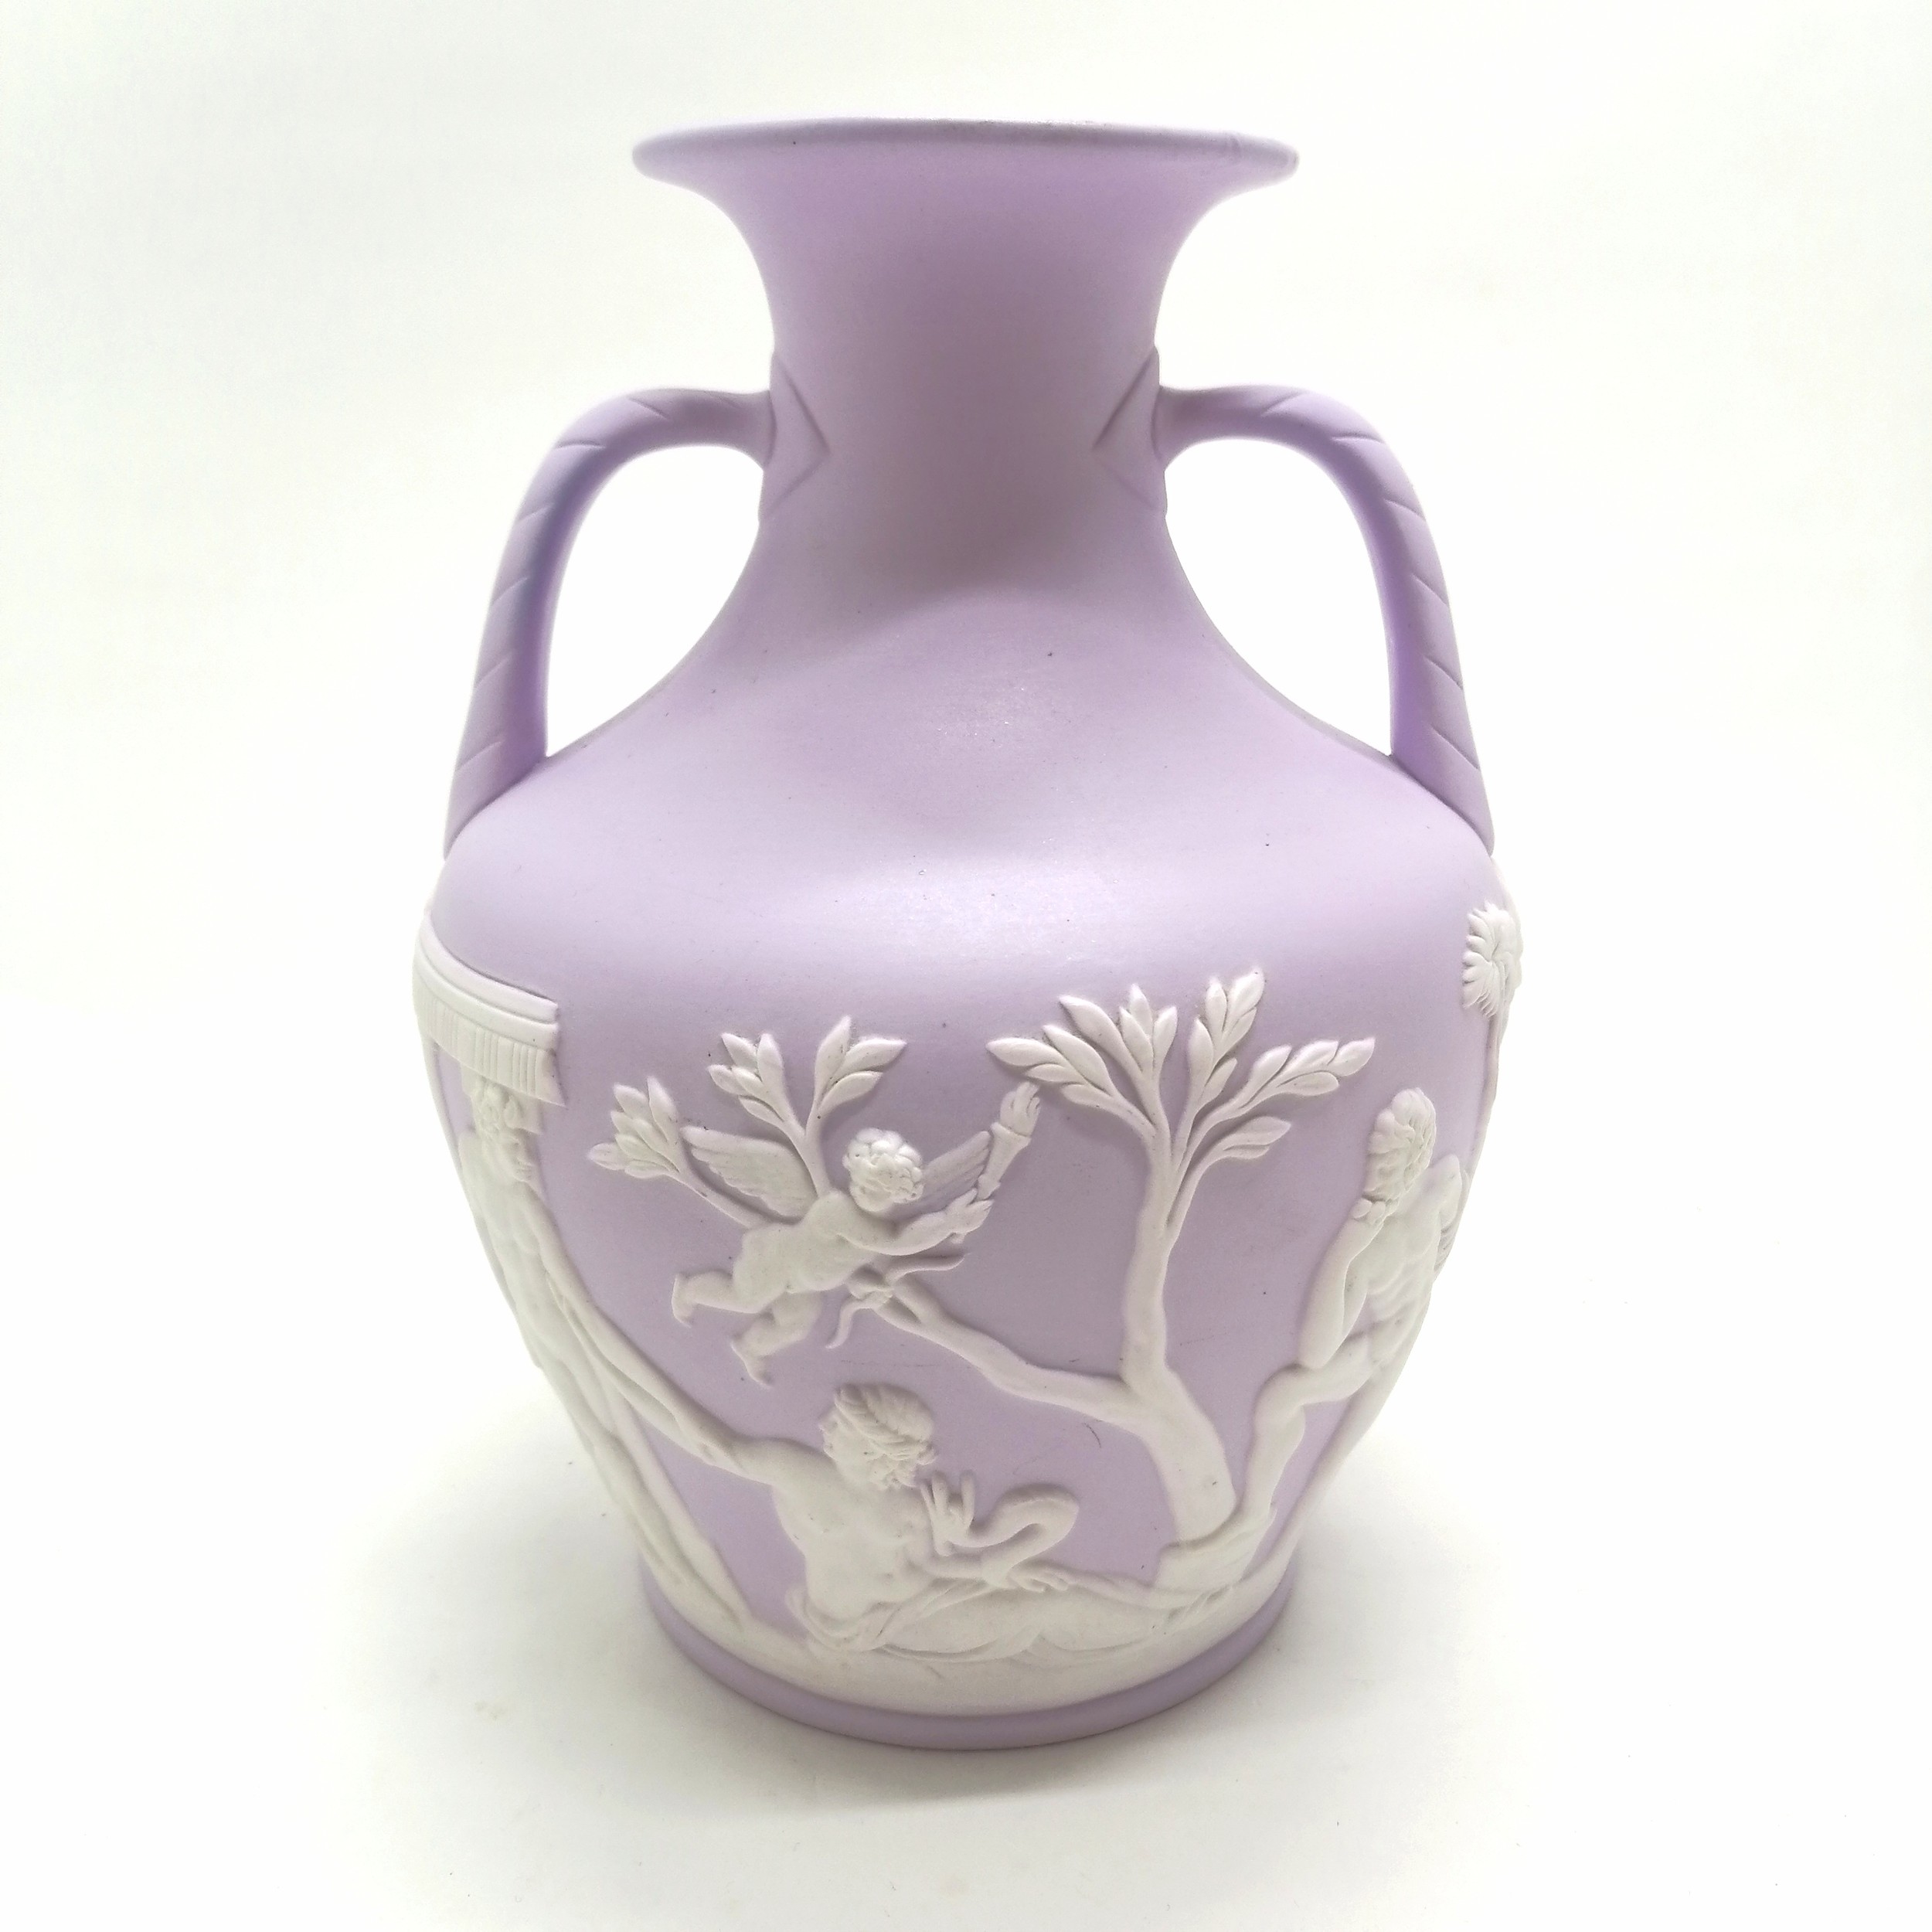 Wedgwood style Portland vase on pink / lilac ground - 25cm high ~ some restoration to top rim